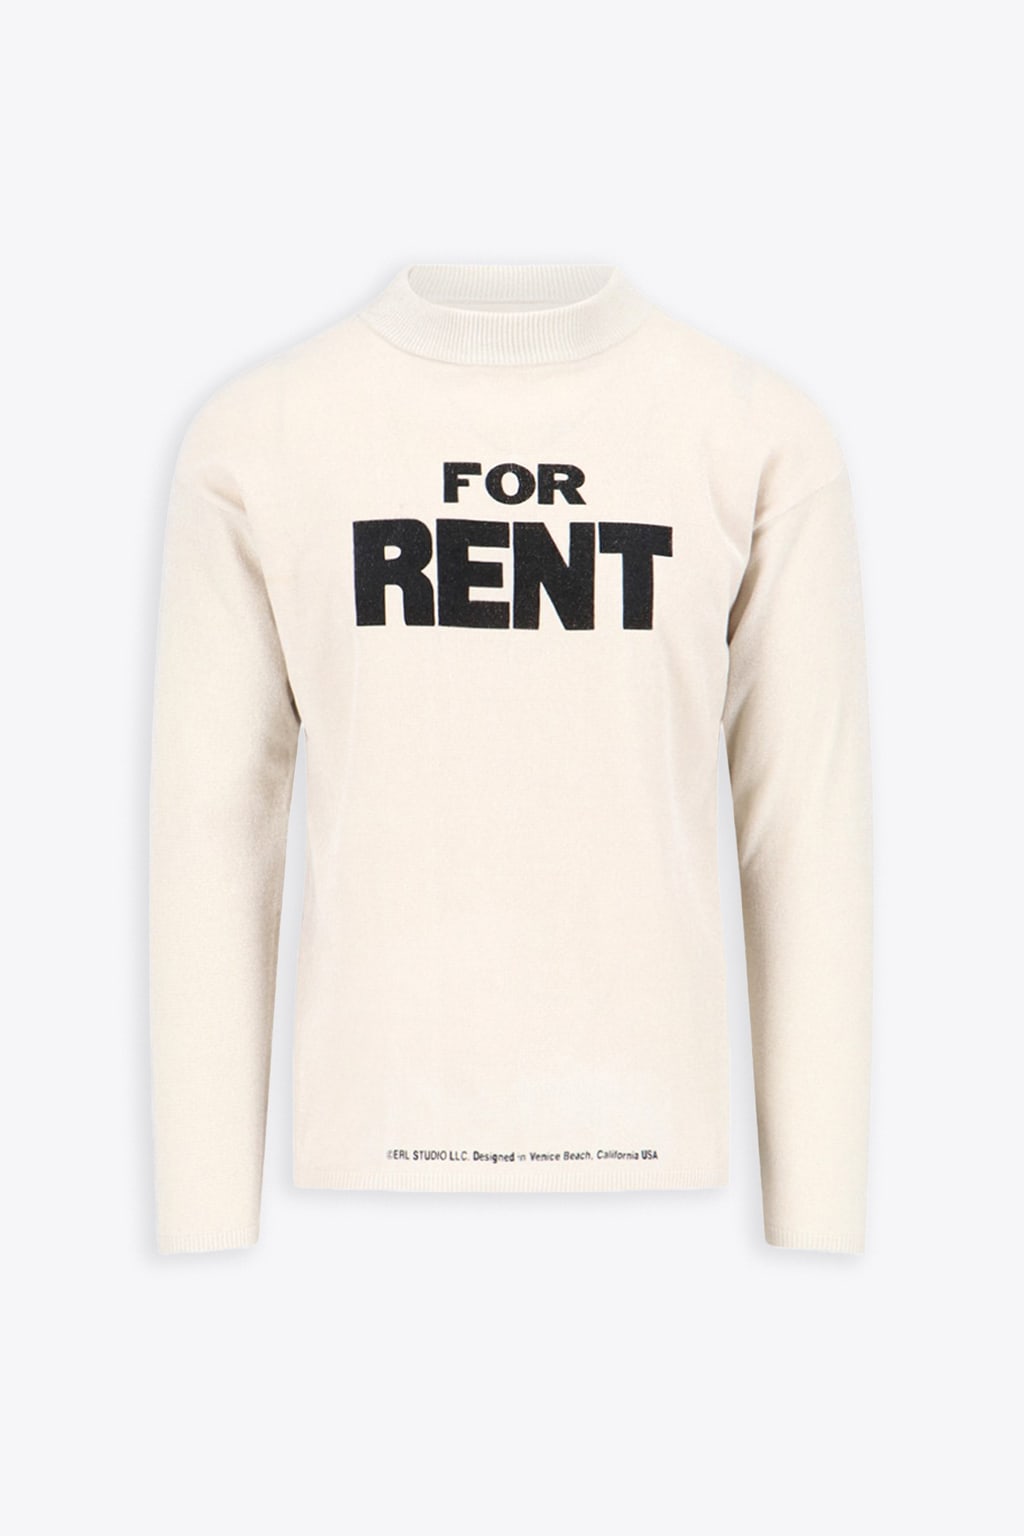 Unisex For Rent Sweater Knit Off White Knitted T-shirt With Long Sleeves - Unisex For Rent Sweater Knit